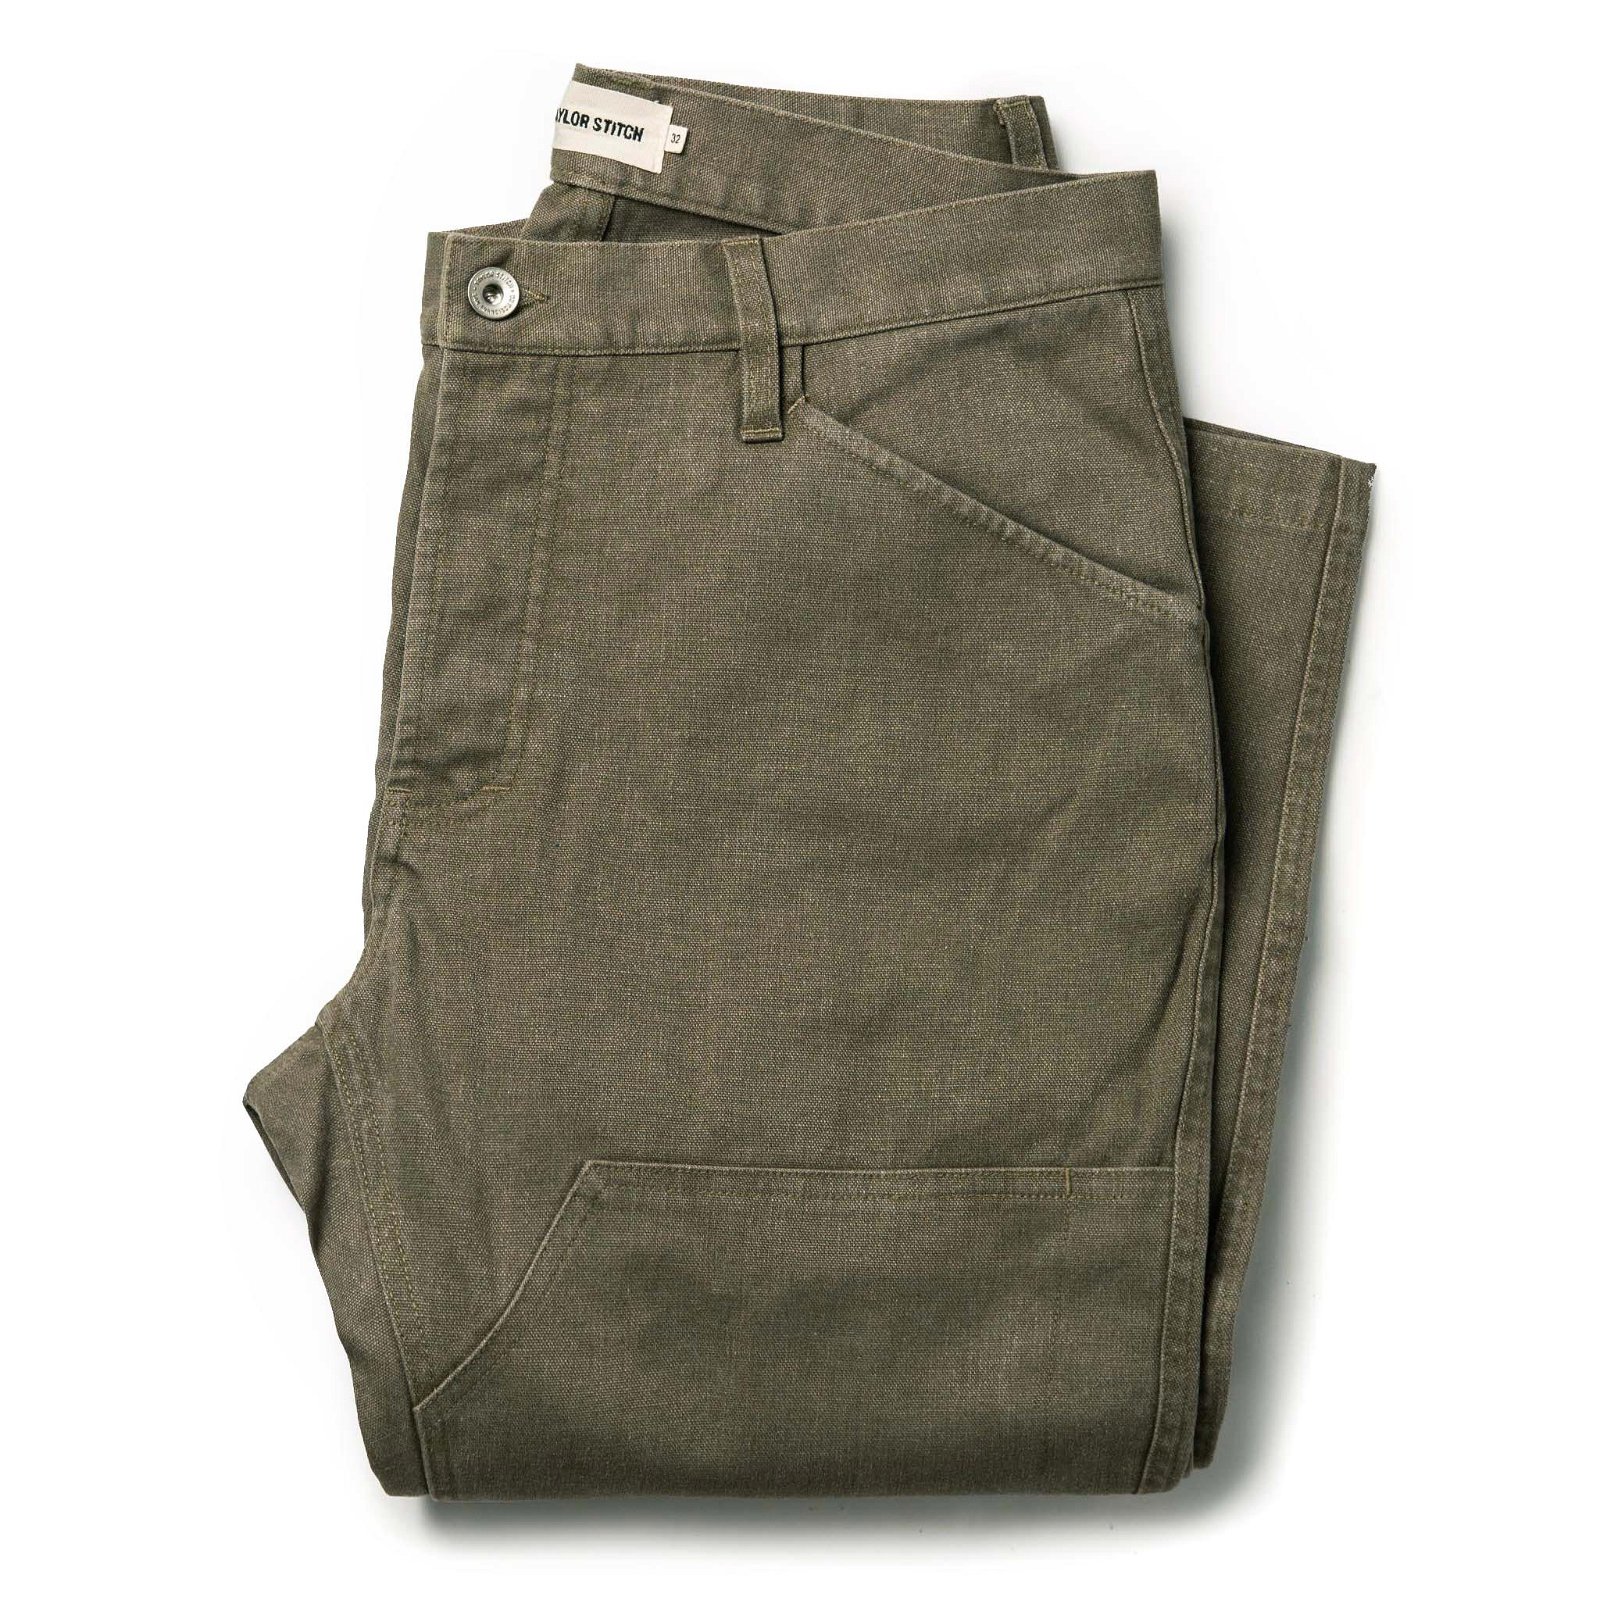 Image of The Chore Pant in Stone Boss Duck